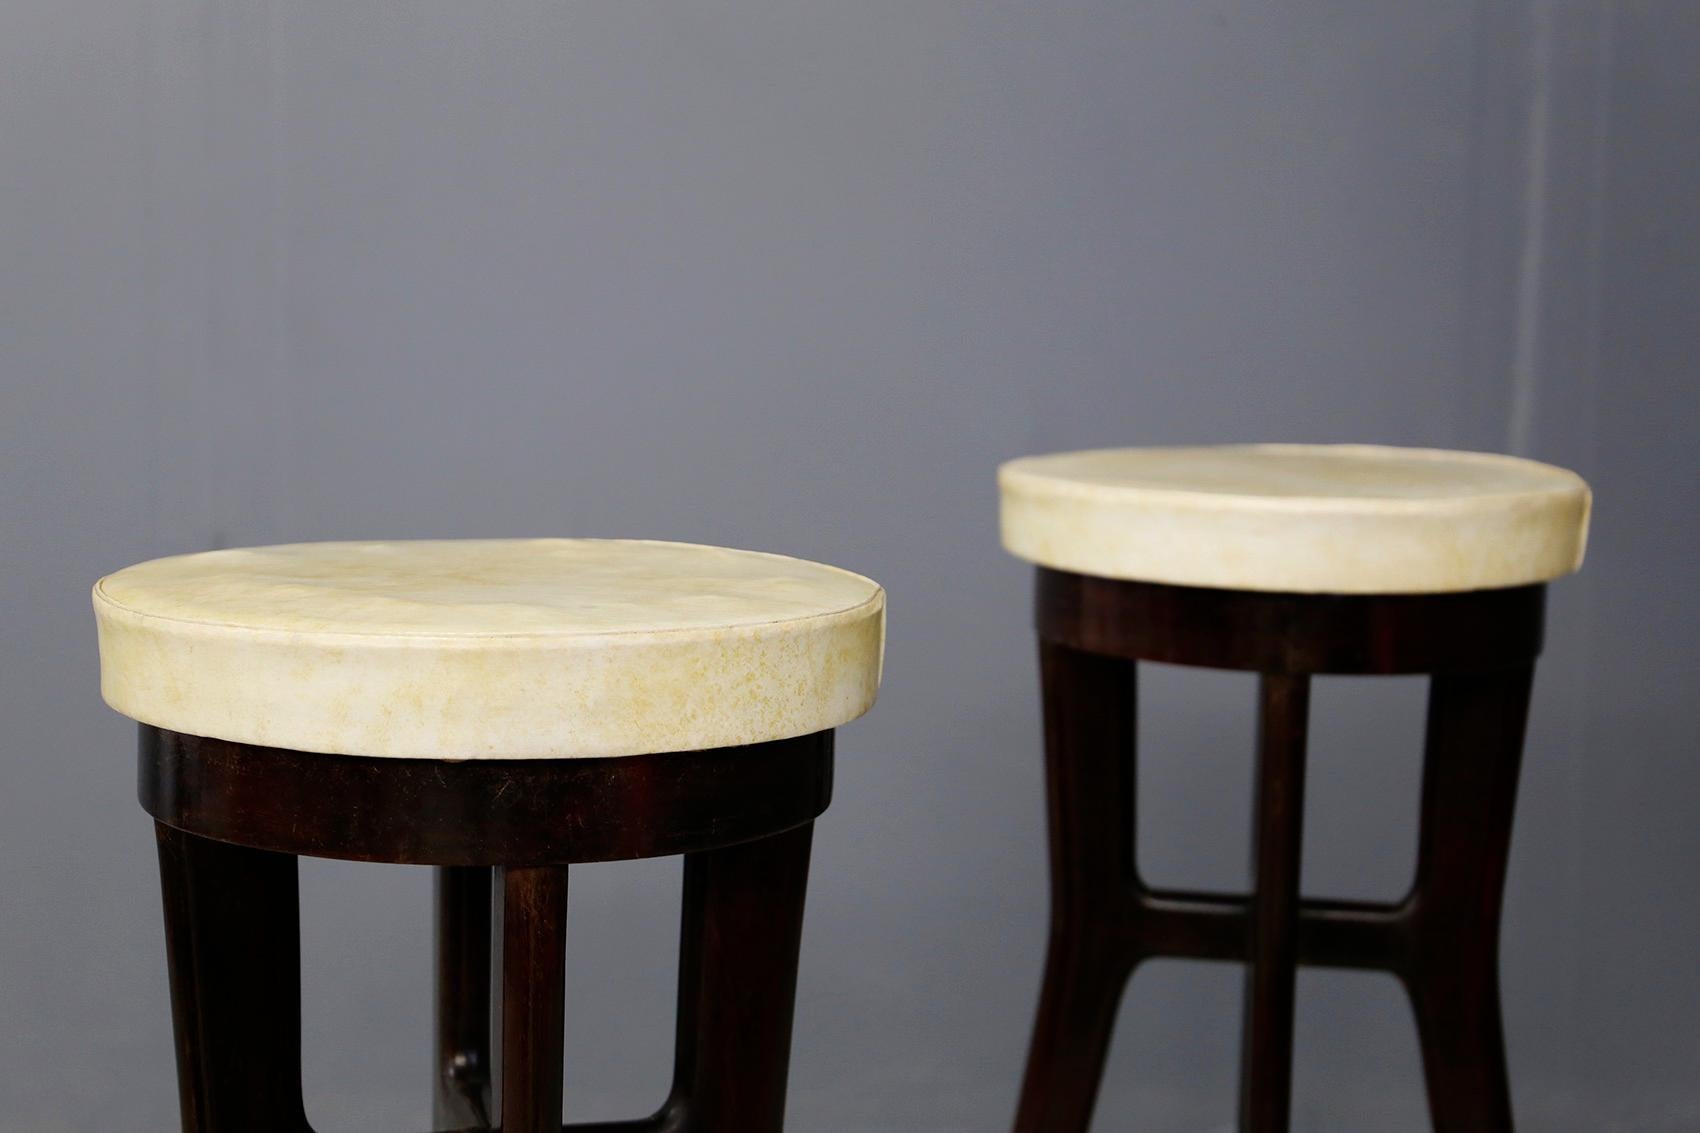 Pair of elegant high stools attributed to Osvaldo Borsani from 1950. The stools are made of walnut wood with 4 conical feet. The seat is covered in cream-colored semi leather. To improve the half-leg seat we find a brass tubular semicircle that